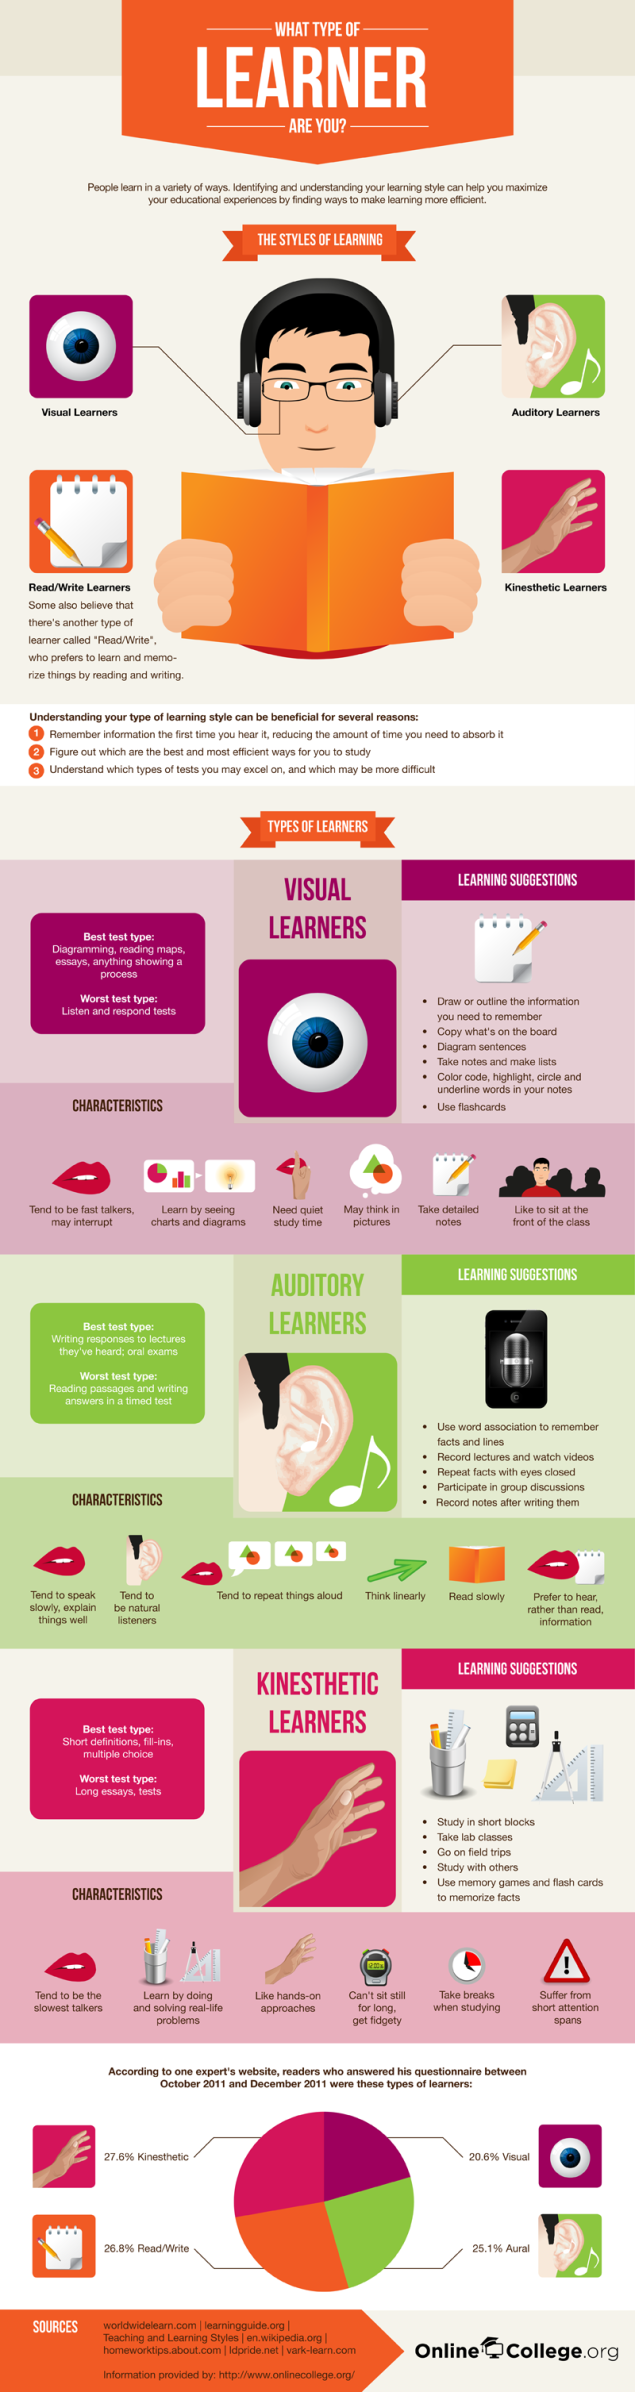 Learning Styles and Young Learners VIEW MORE (SOURCE: valentinamorgana.wordpress.com)